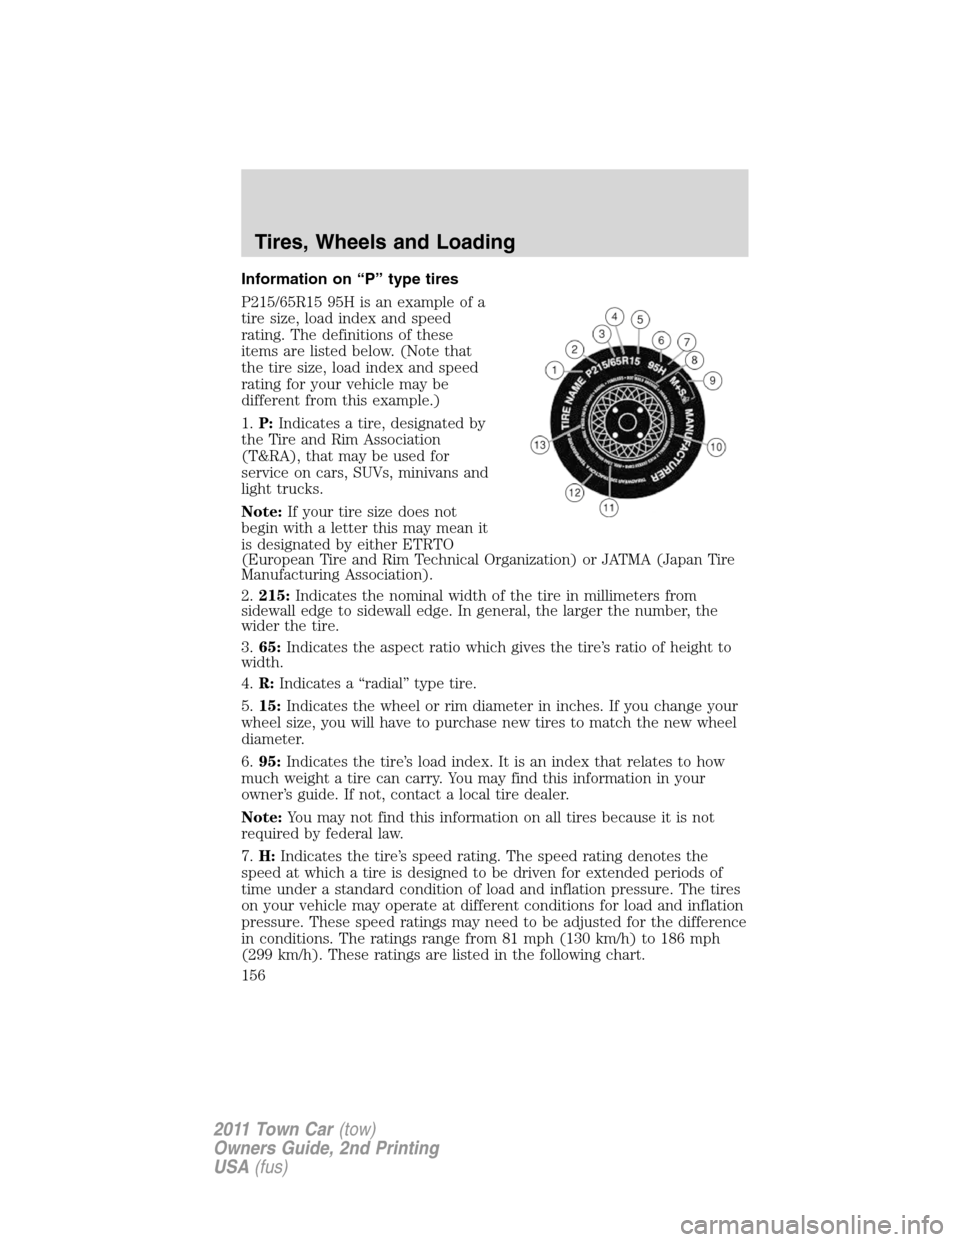 LINCOLN TOWN CAR 2011 User Guide Information on “P” type tires
P215/65R15 95H is an example of a
tire size, load index and speed
rating. The definitions of these
items are listed below. (Note that
the tire size, load index and sp